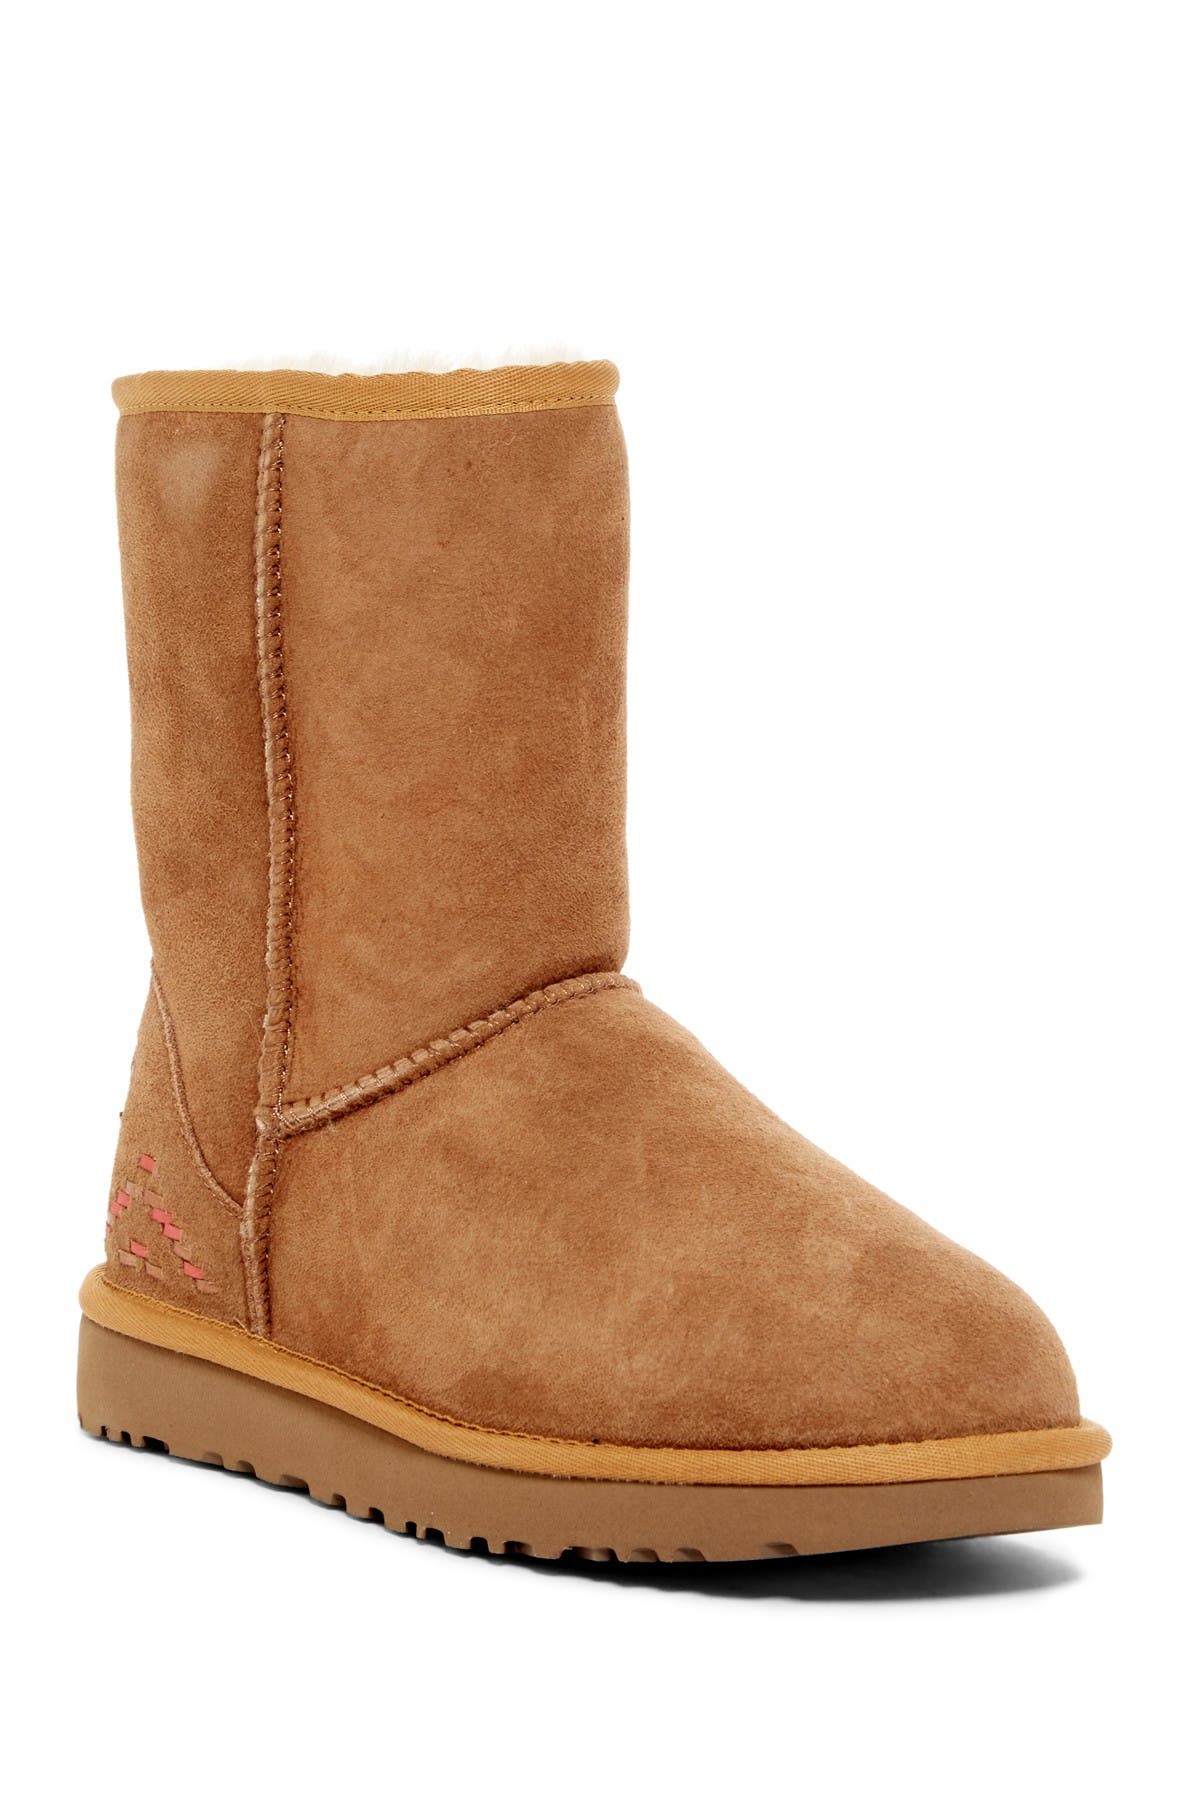 classic genuine shearling lined short rustic weave boot